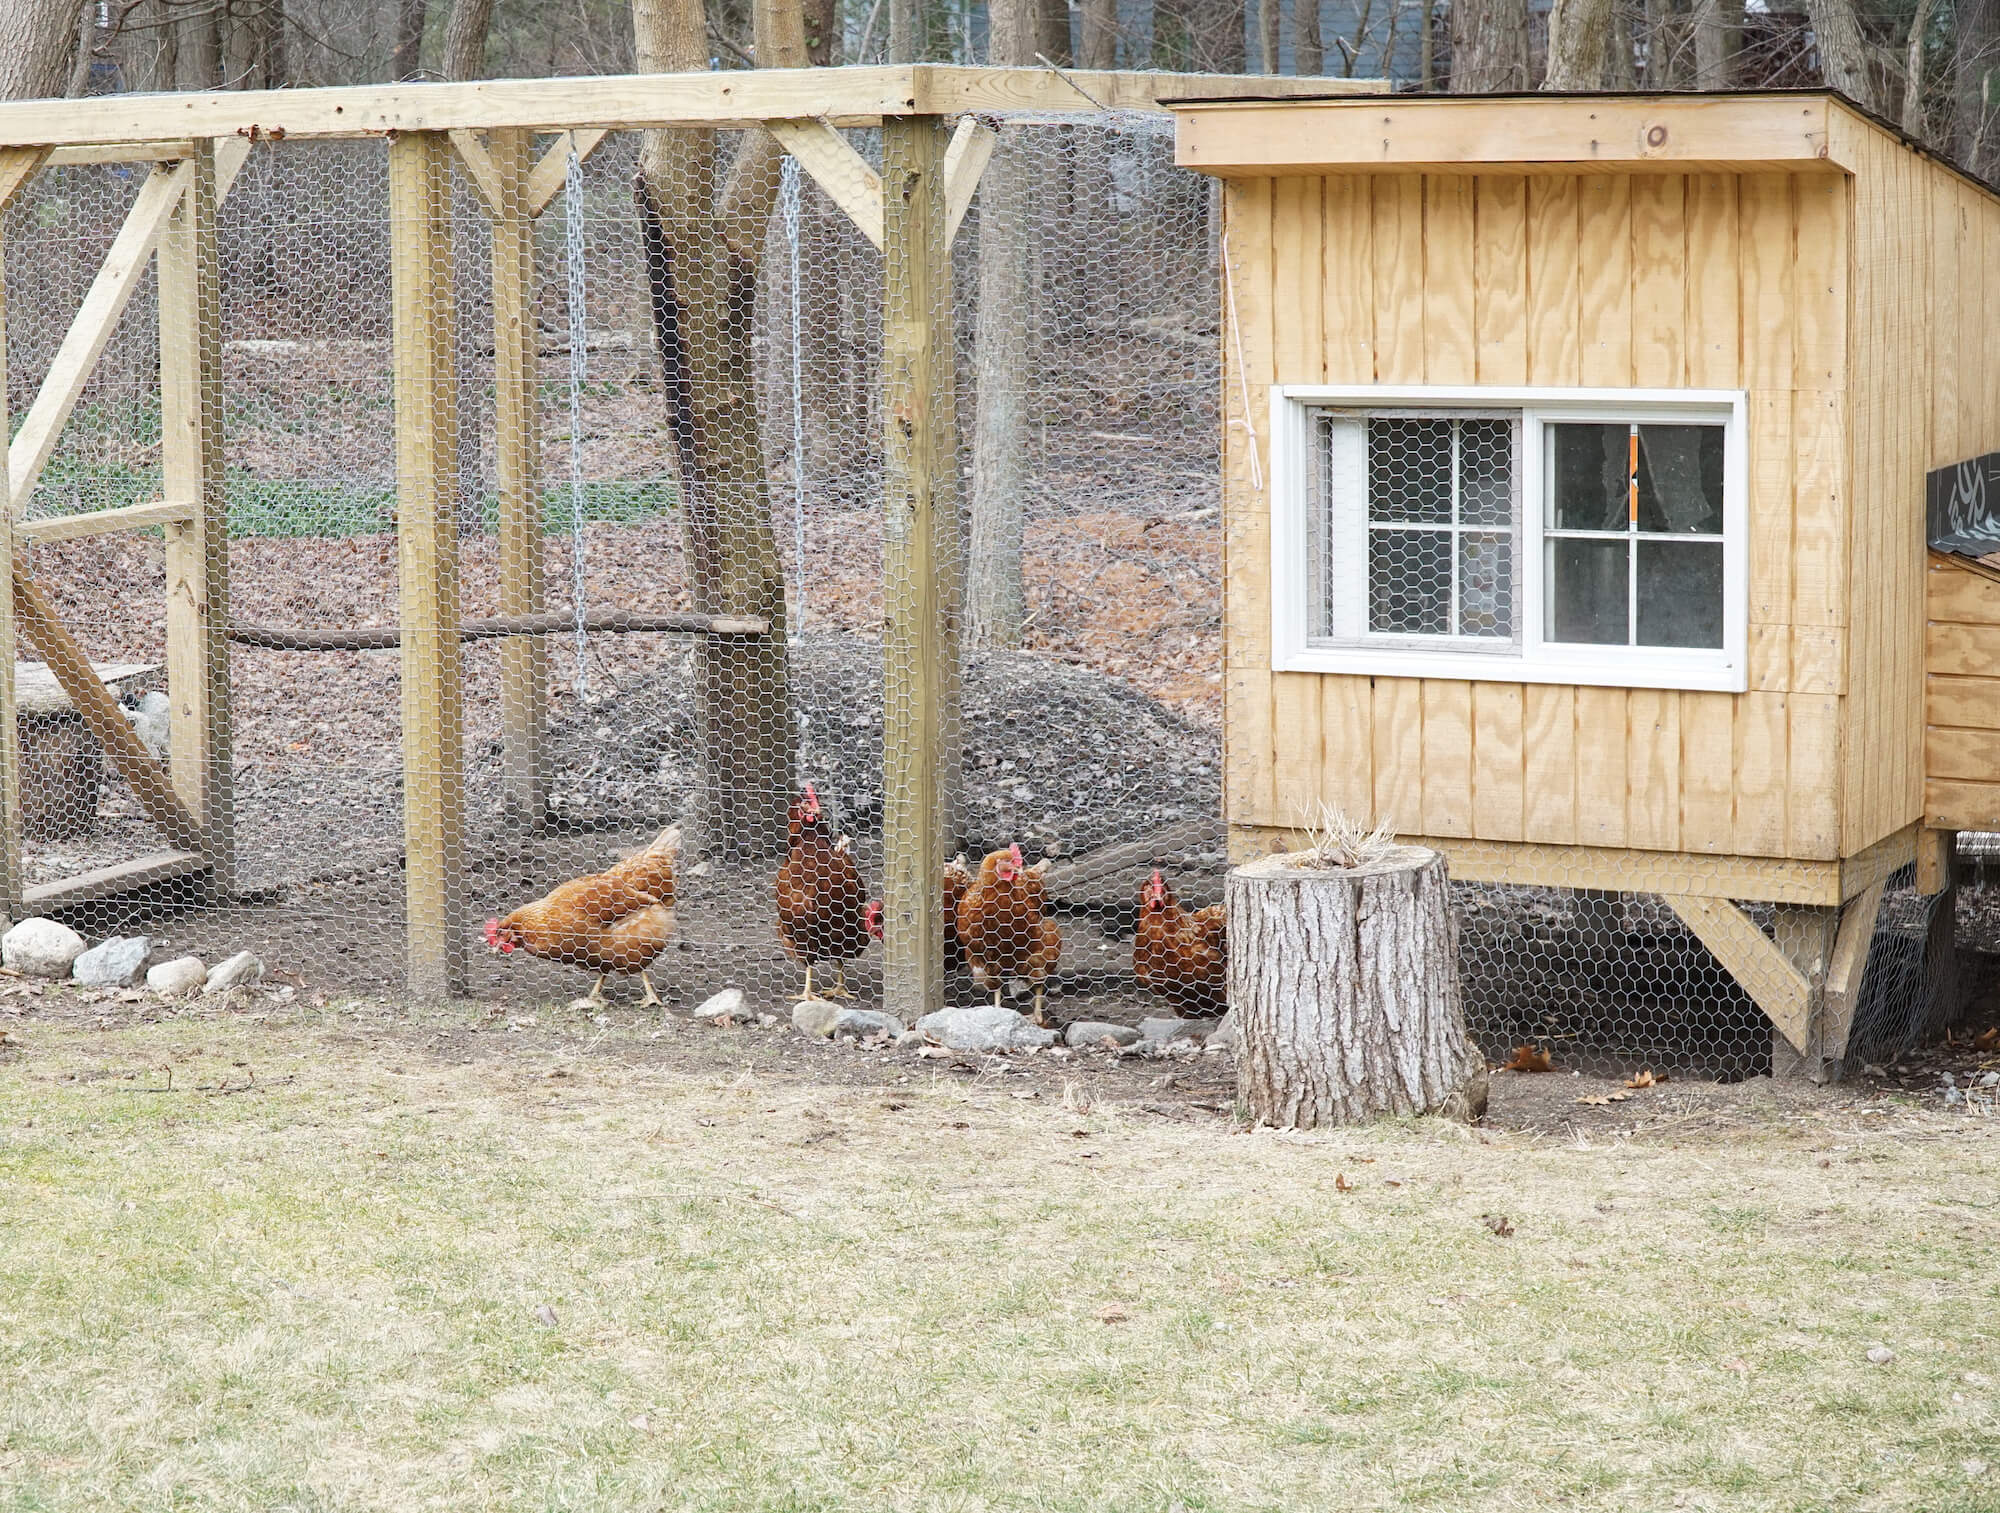 How Much Does a Chicken Coop Cost